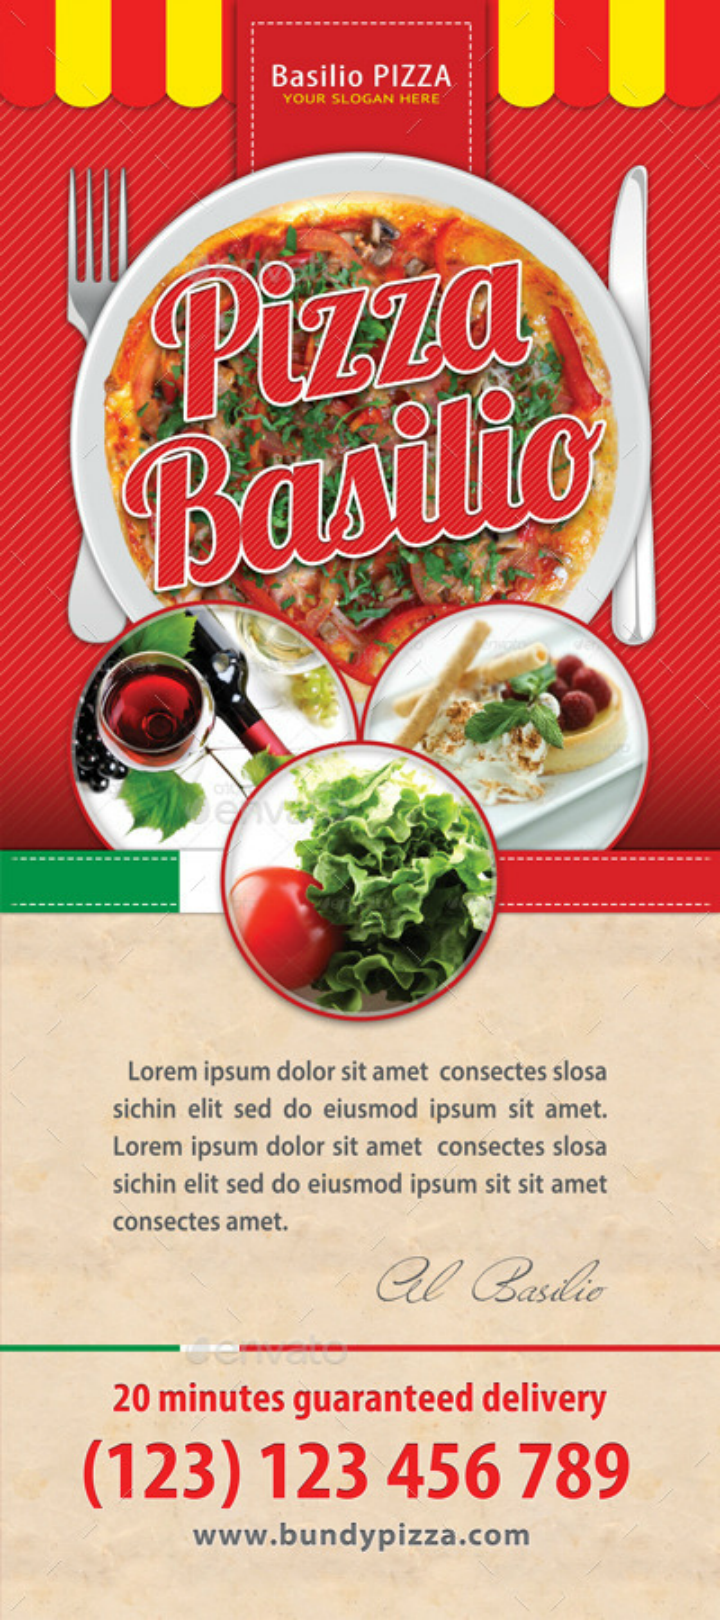 red-pizza-restaurant-rollup-banner-template